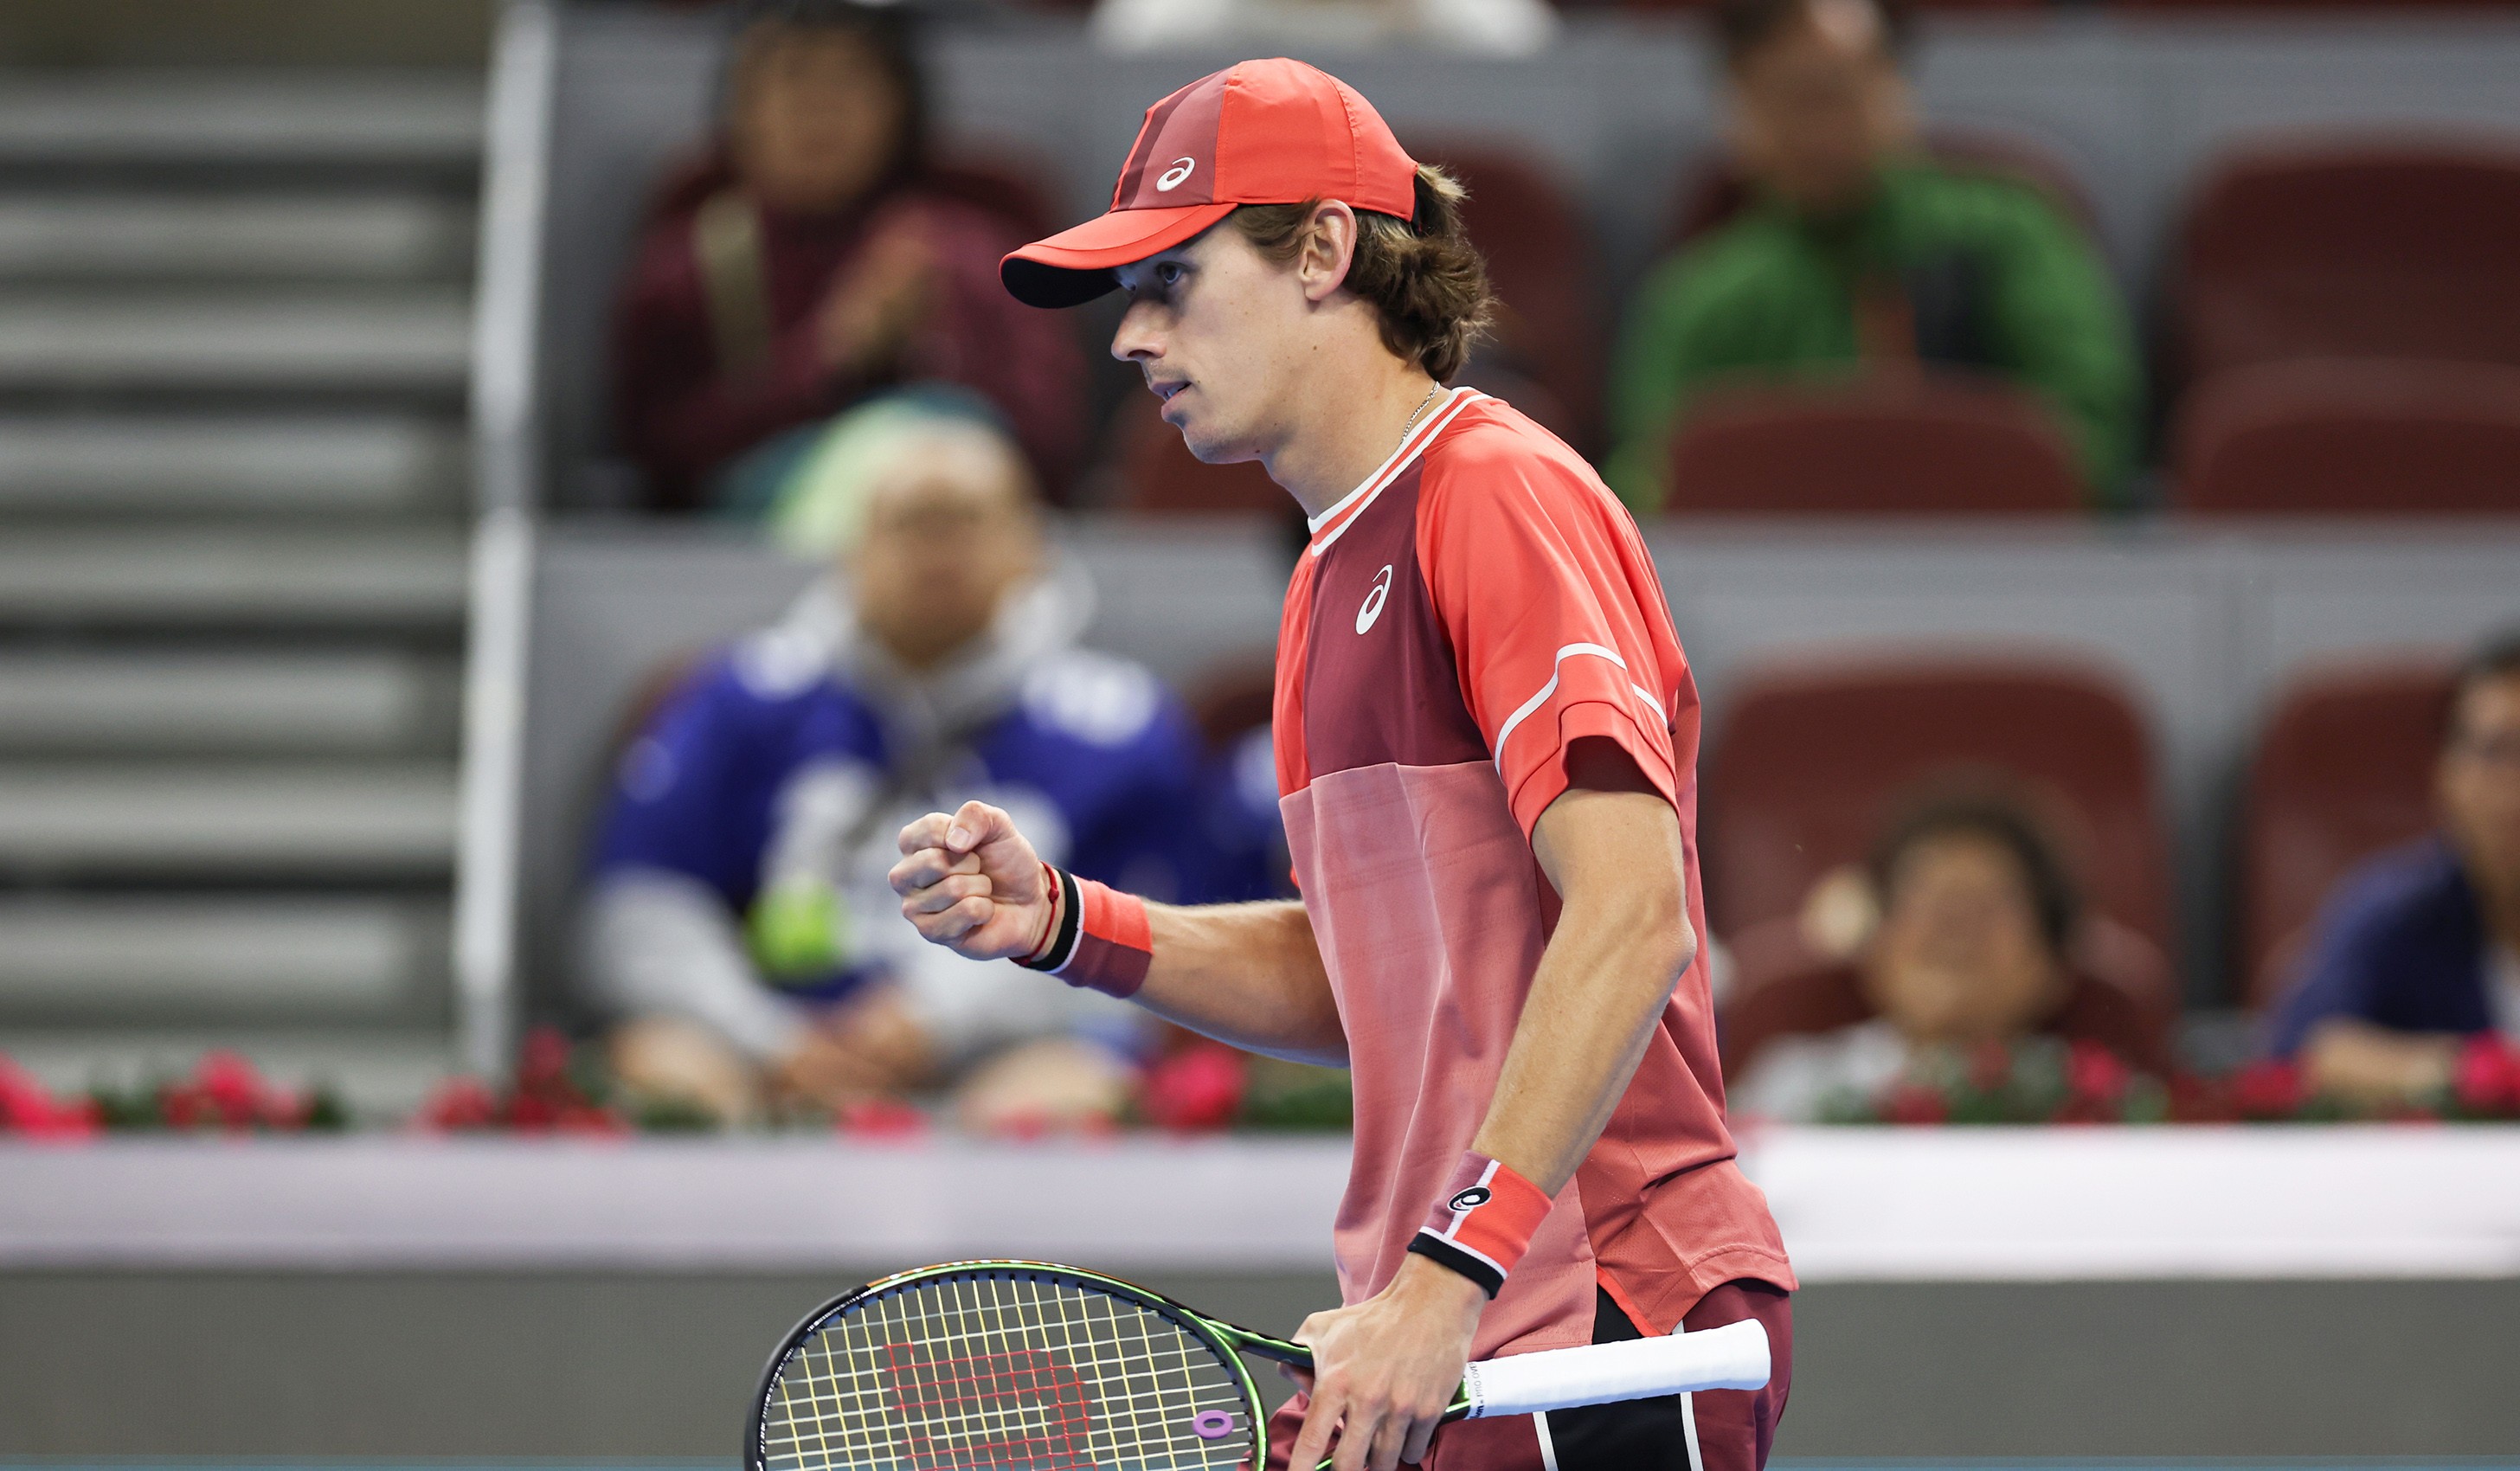 Alex de Minaur now 5-0 against Andy Murray thanks to three match point saves in Beijing